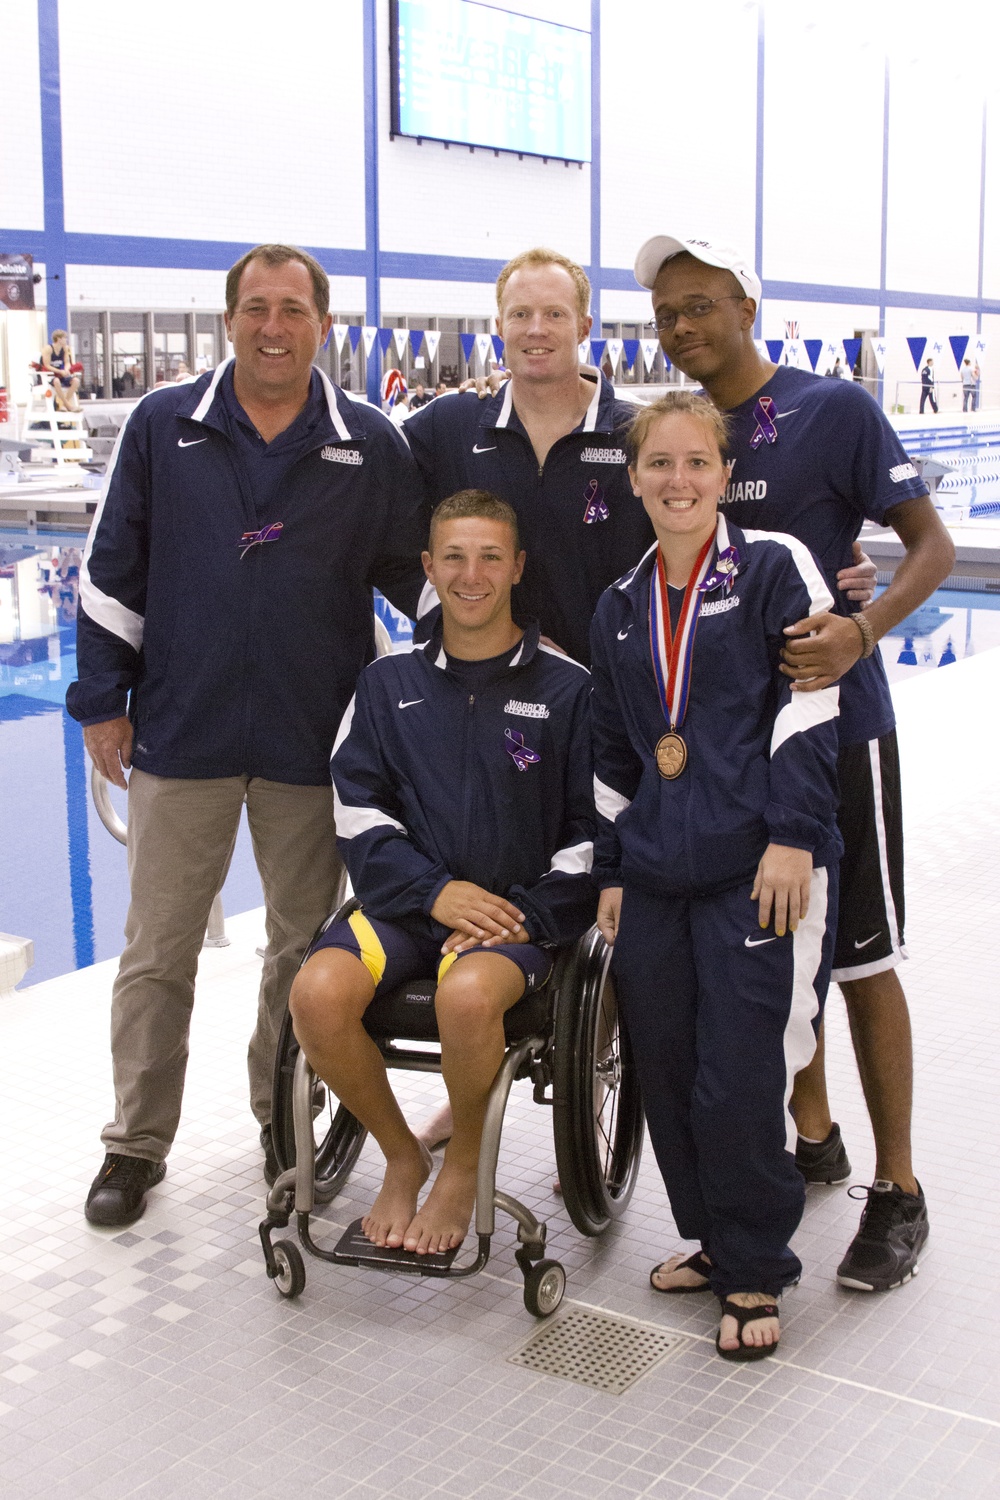 Team Navy/Coast Guard swims for teammate at 2012 Warrior Games